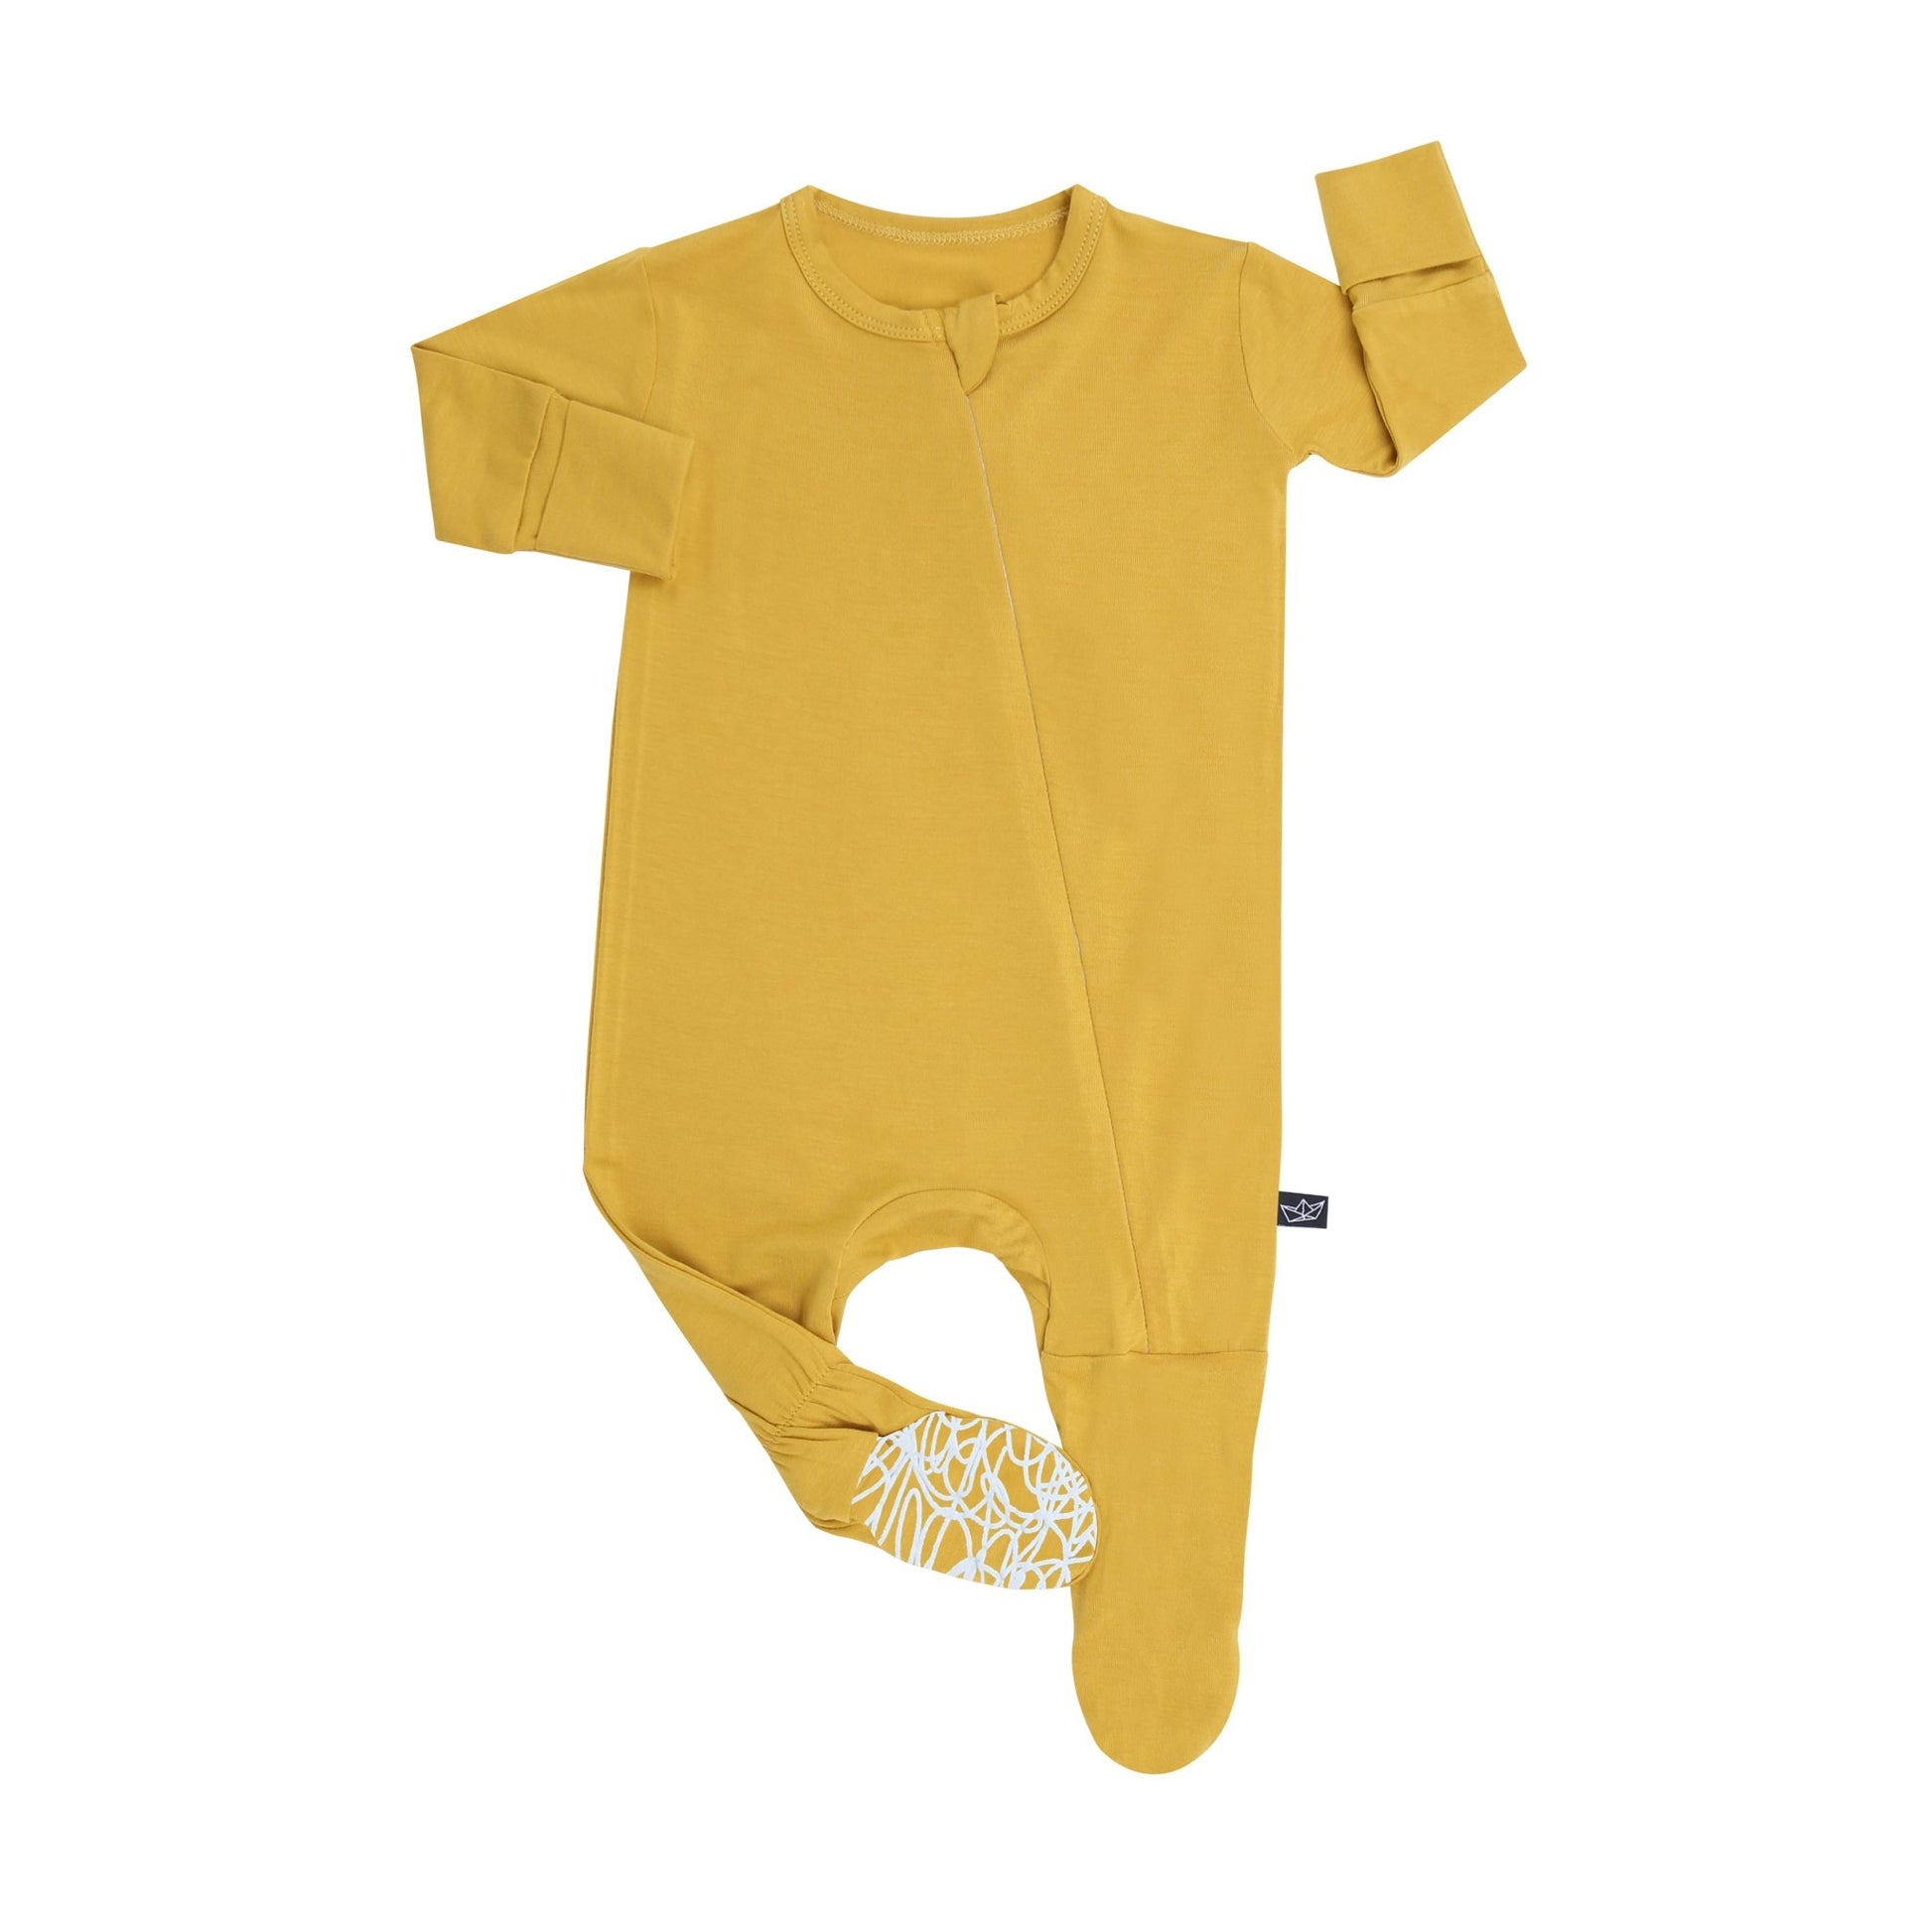 Goldenrod Infant Bamboo Footed Sleeper - Peregrine Kidswear - Footed Sleepers - 0-3M